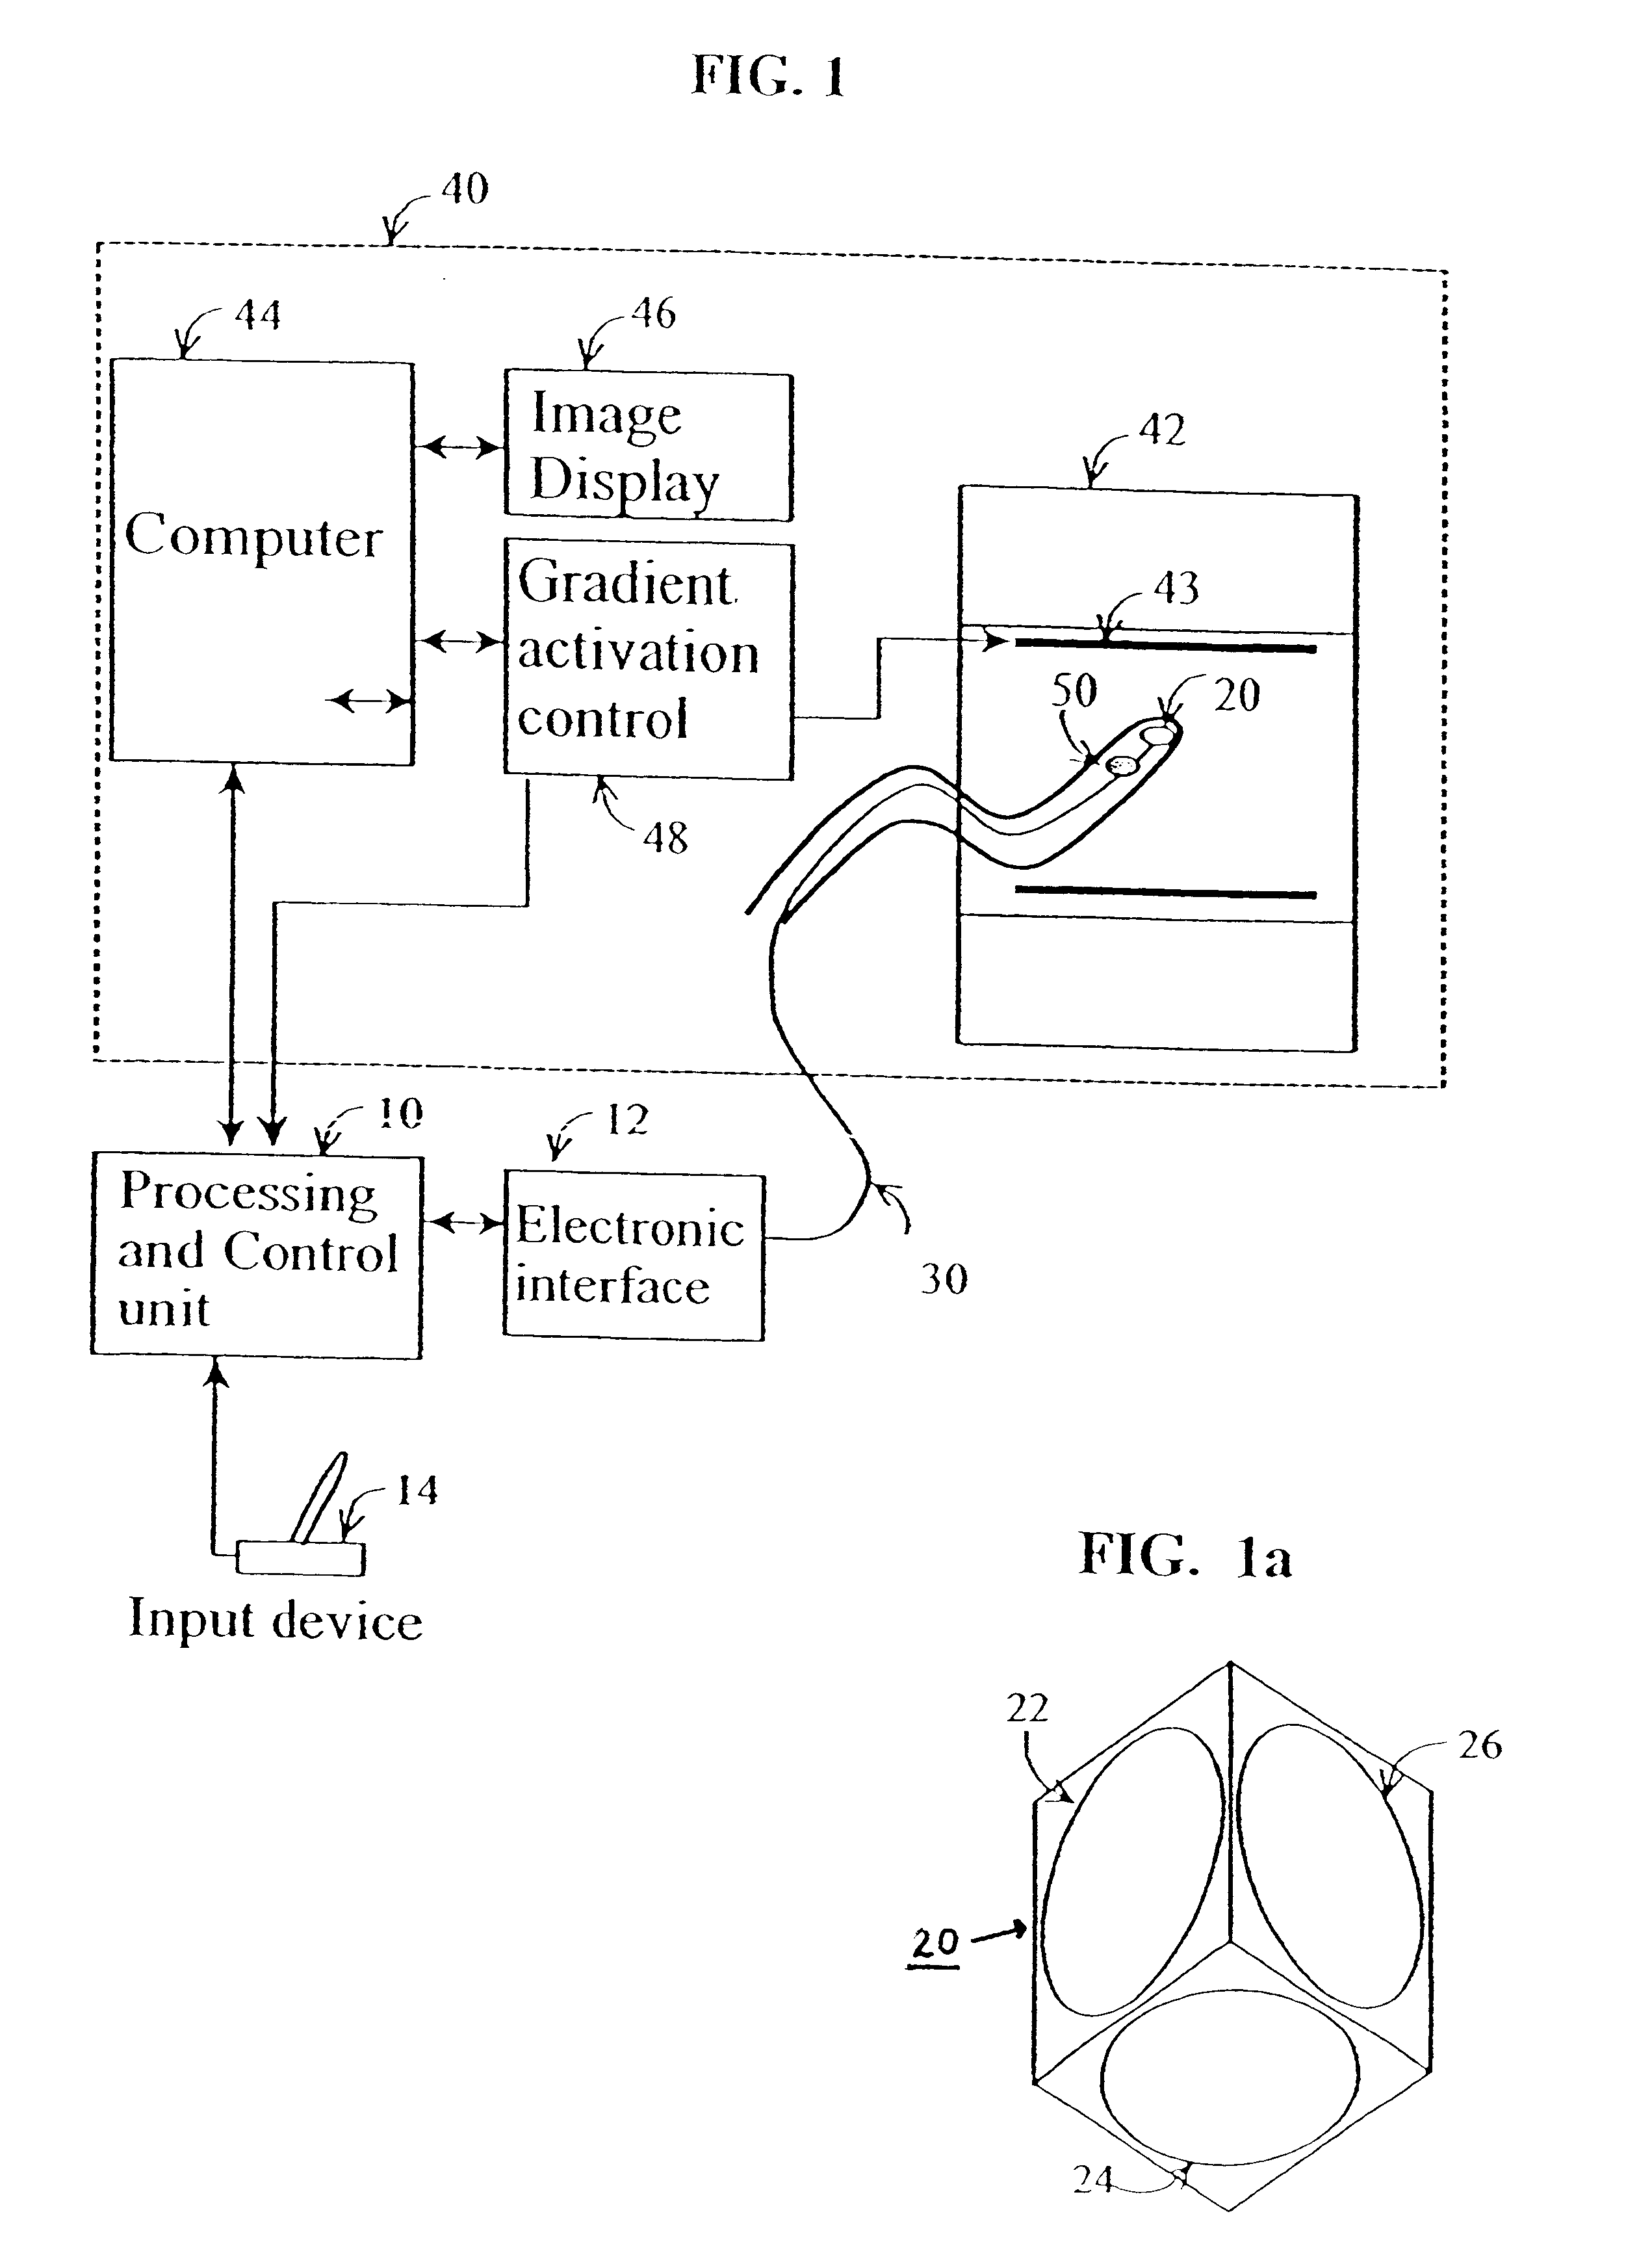 Method and apparatus for generating controlled torques on objects particularly objects inside a living body